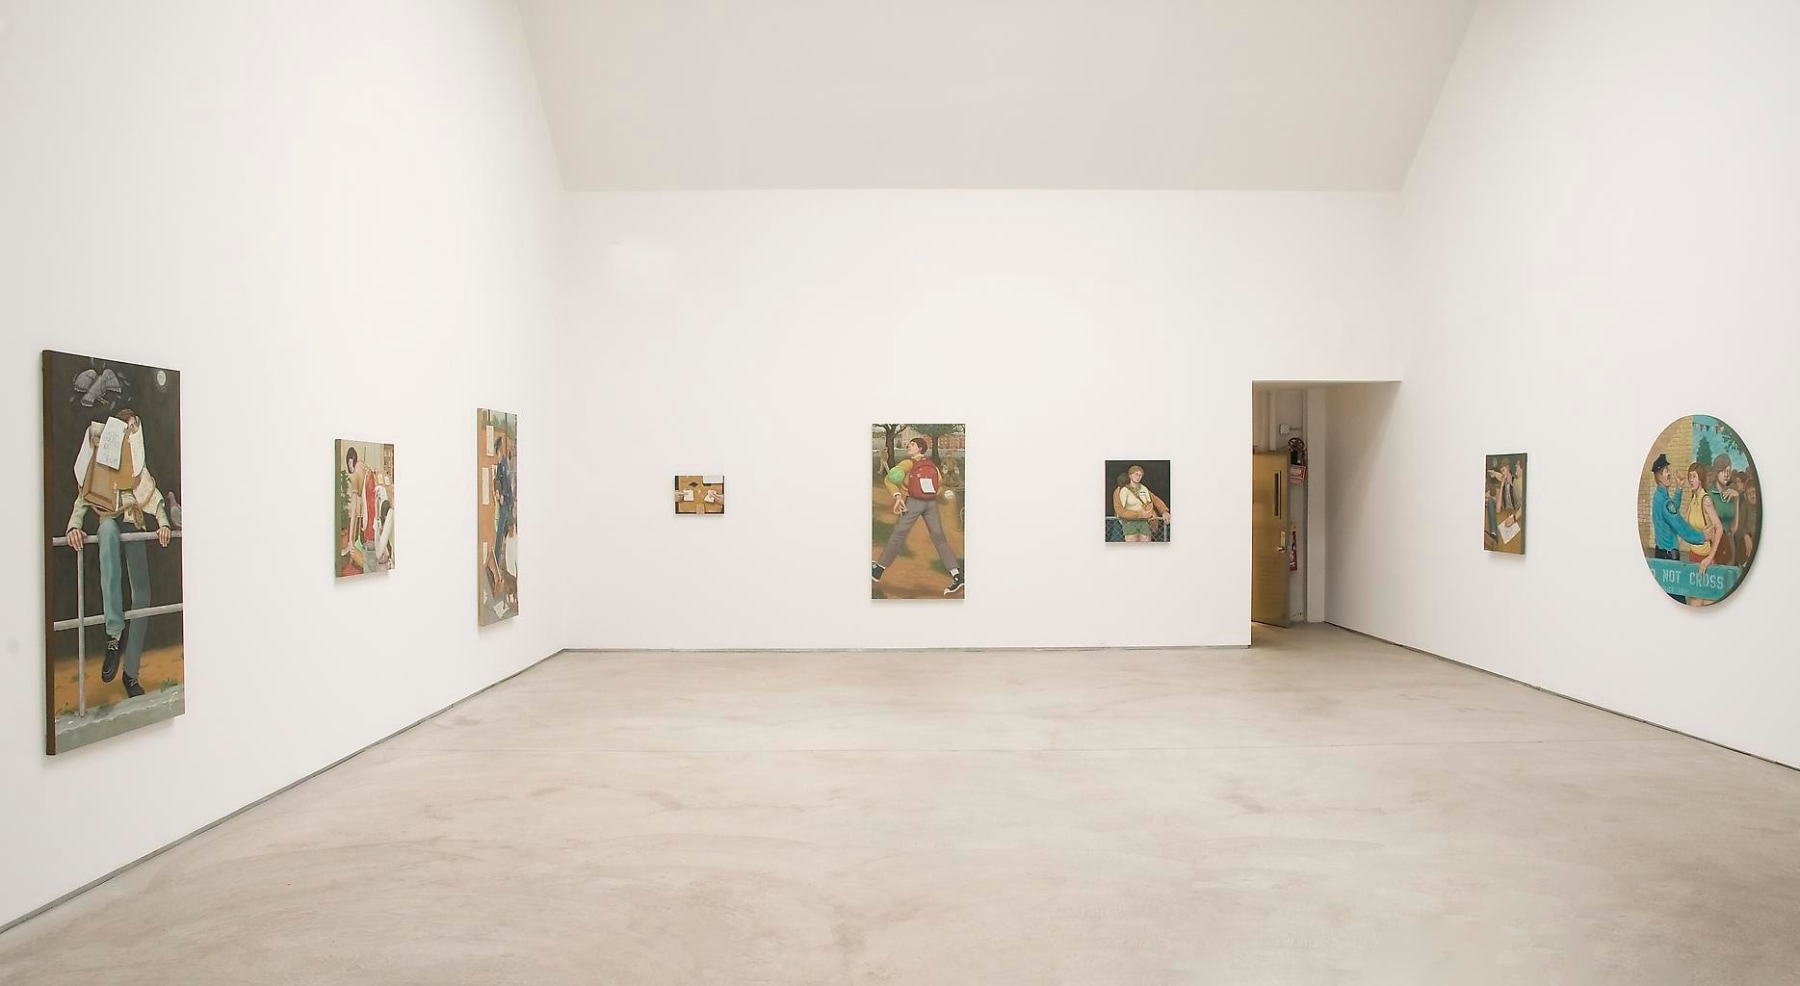  Installation view, Michael Cline, Fifth Column, Marc Jancou, New York, September 10 - October 30, 2009